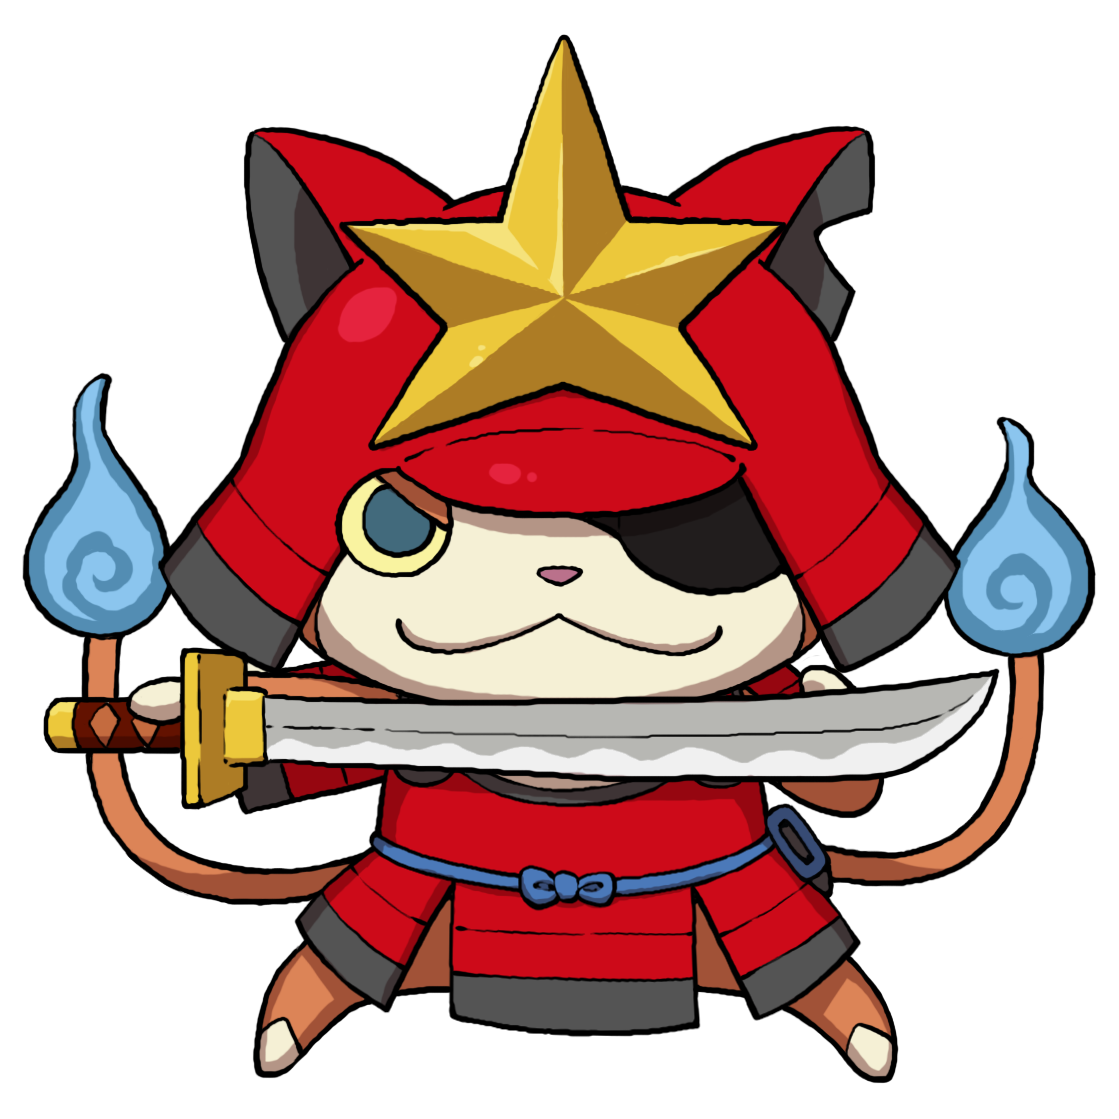 Yo-Kai Watch review: A Pokemon rival with anime credentials